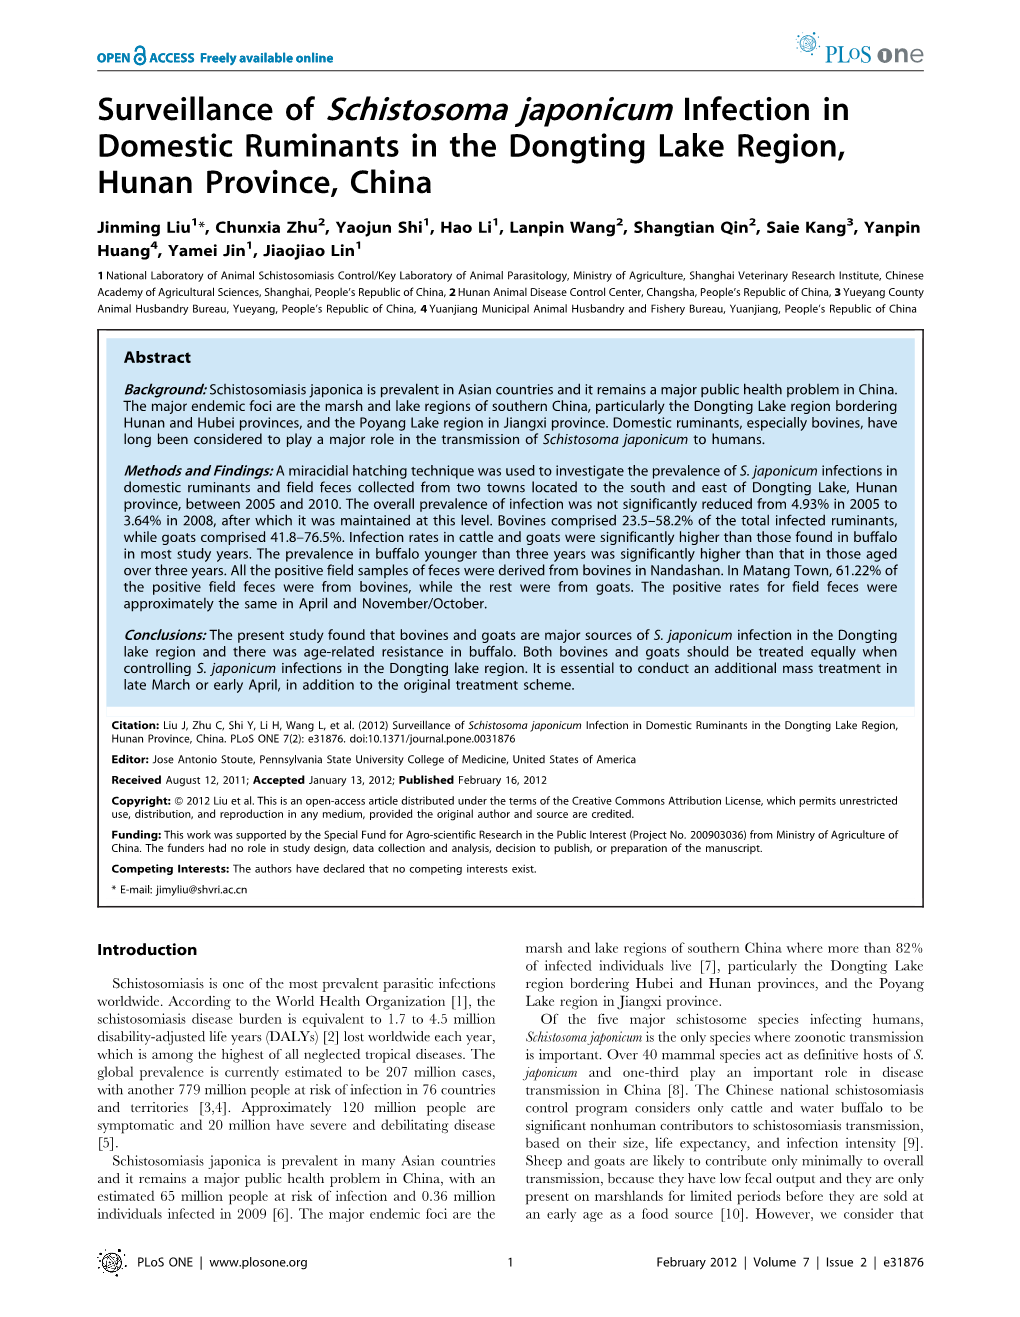 Surveillance of Schistosoma Japonicum Infection in Domestic Ruminants in the Dongting Lake Region, Hunan Province, China